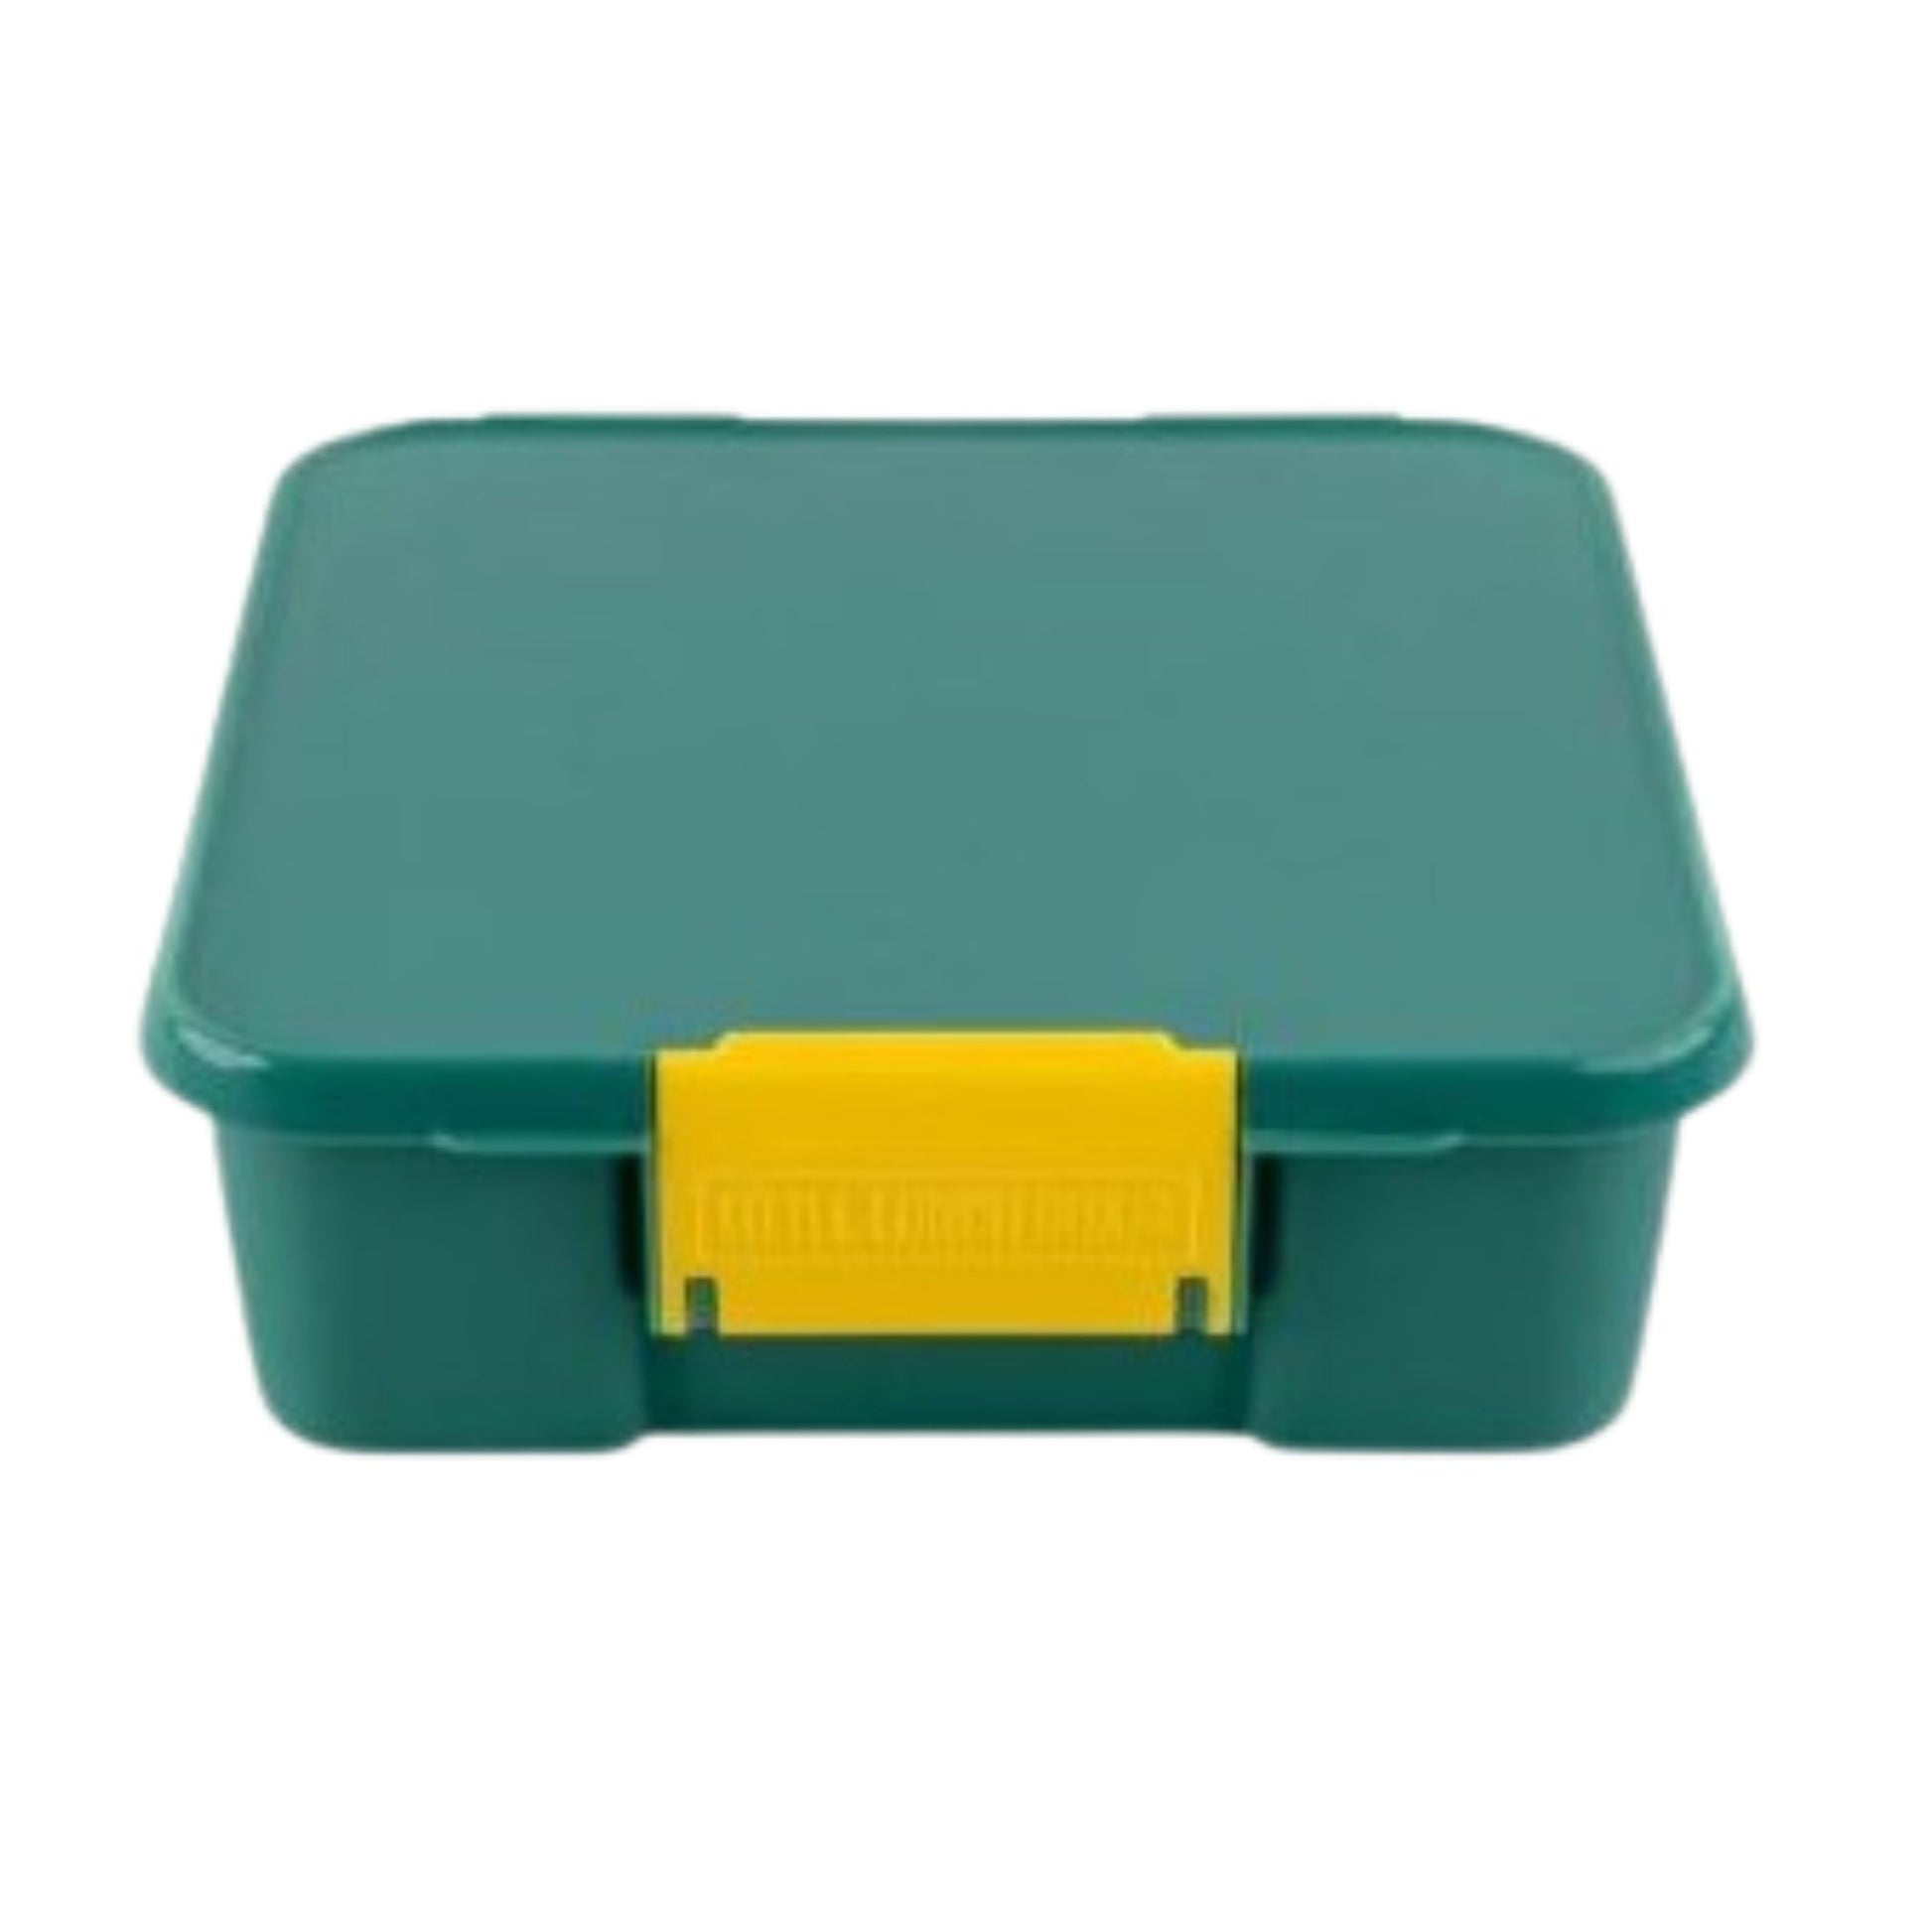 Green with yellow clip bento style lunch box from Little Lunch Box Co.